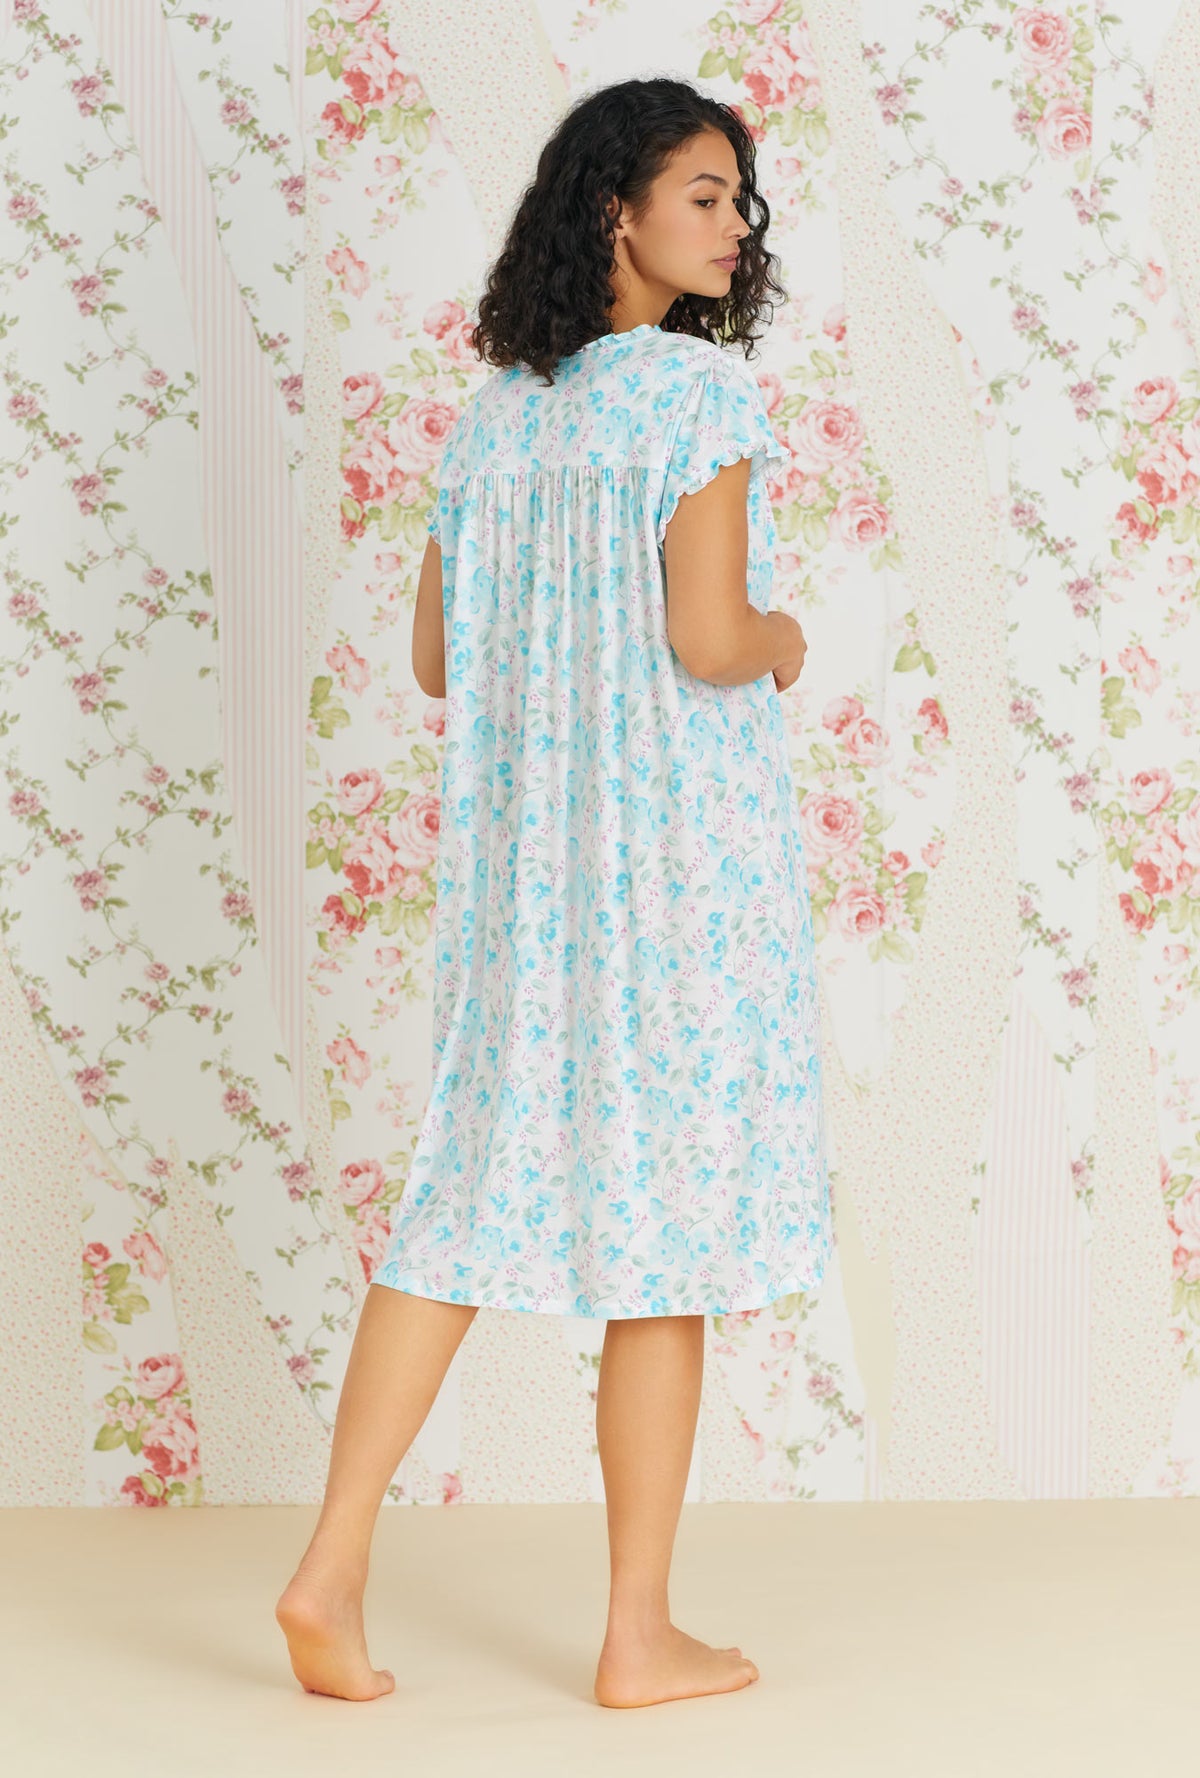 A lady wearing a white and aqua cap sleeve waltz knit nightgown with primrose garden print.